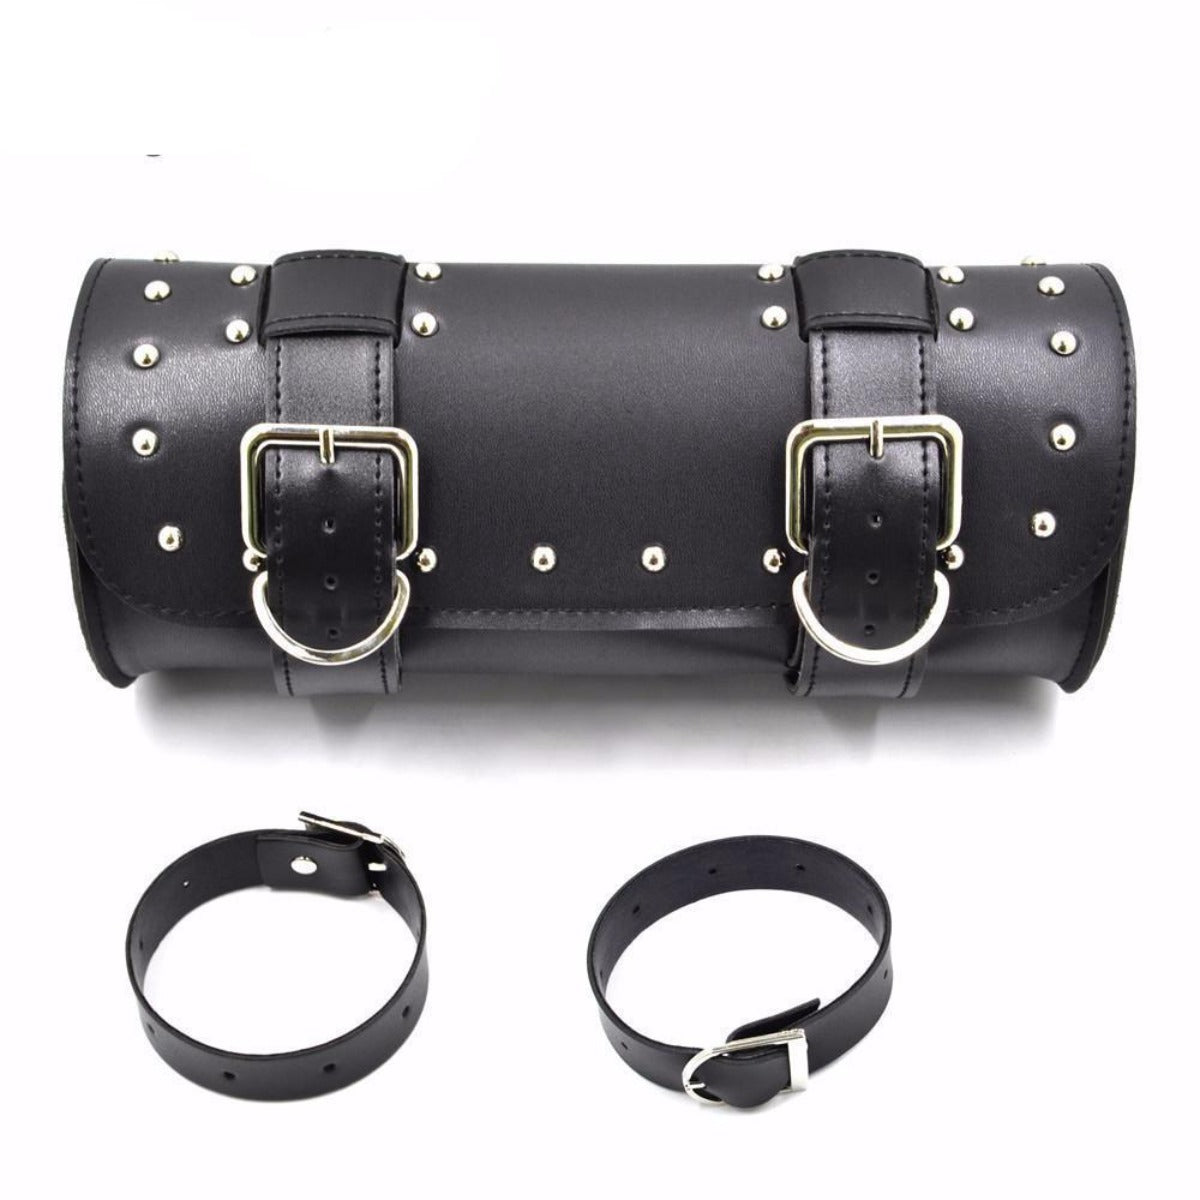 A black Motorcycle Leather Duffle Roll Bag with buckles and cuffs, perfect for motorcycle enthusiasts or as a Harley-Davidson luggage bag.